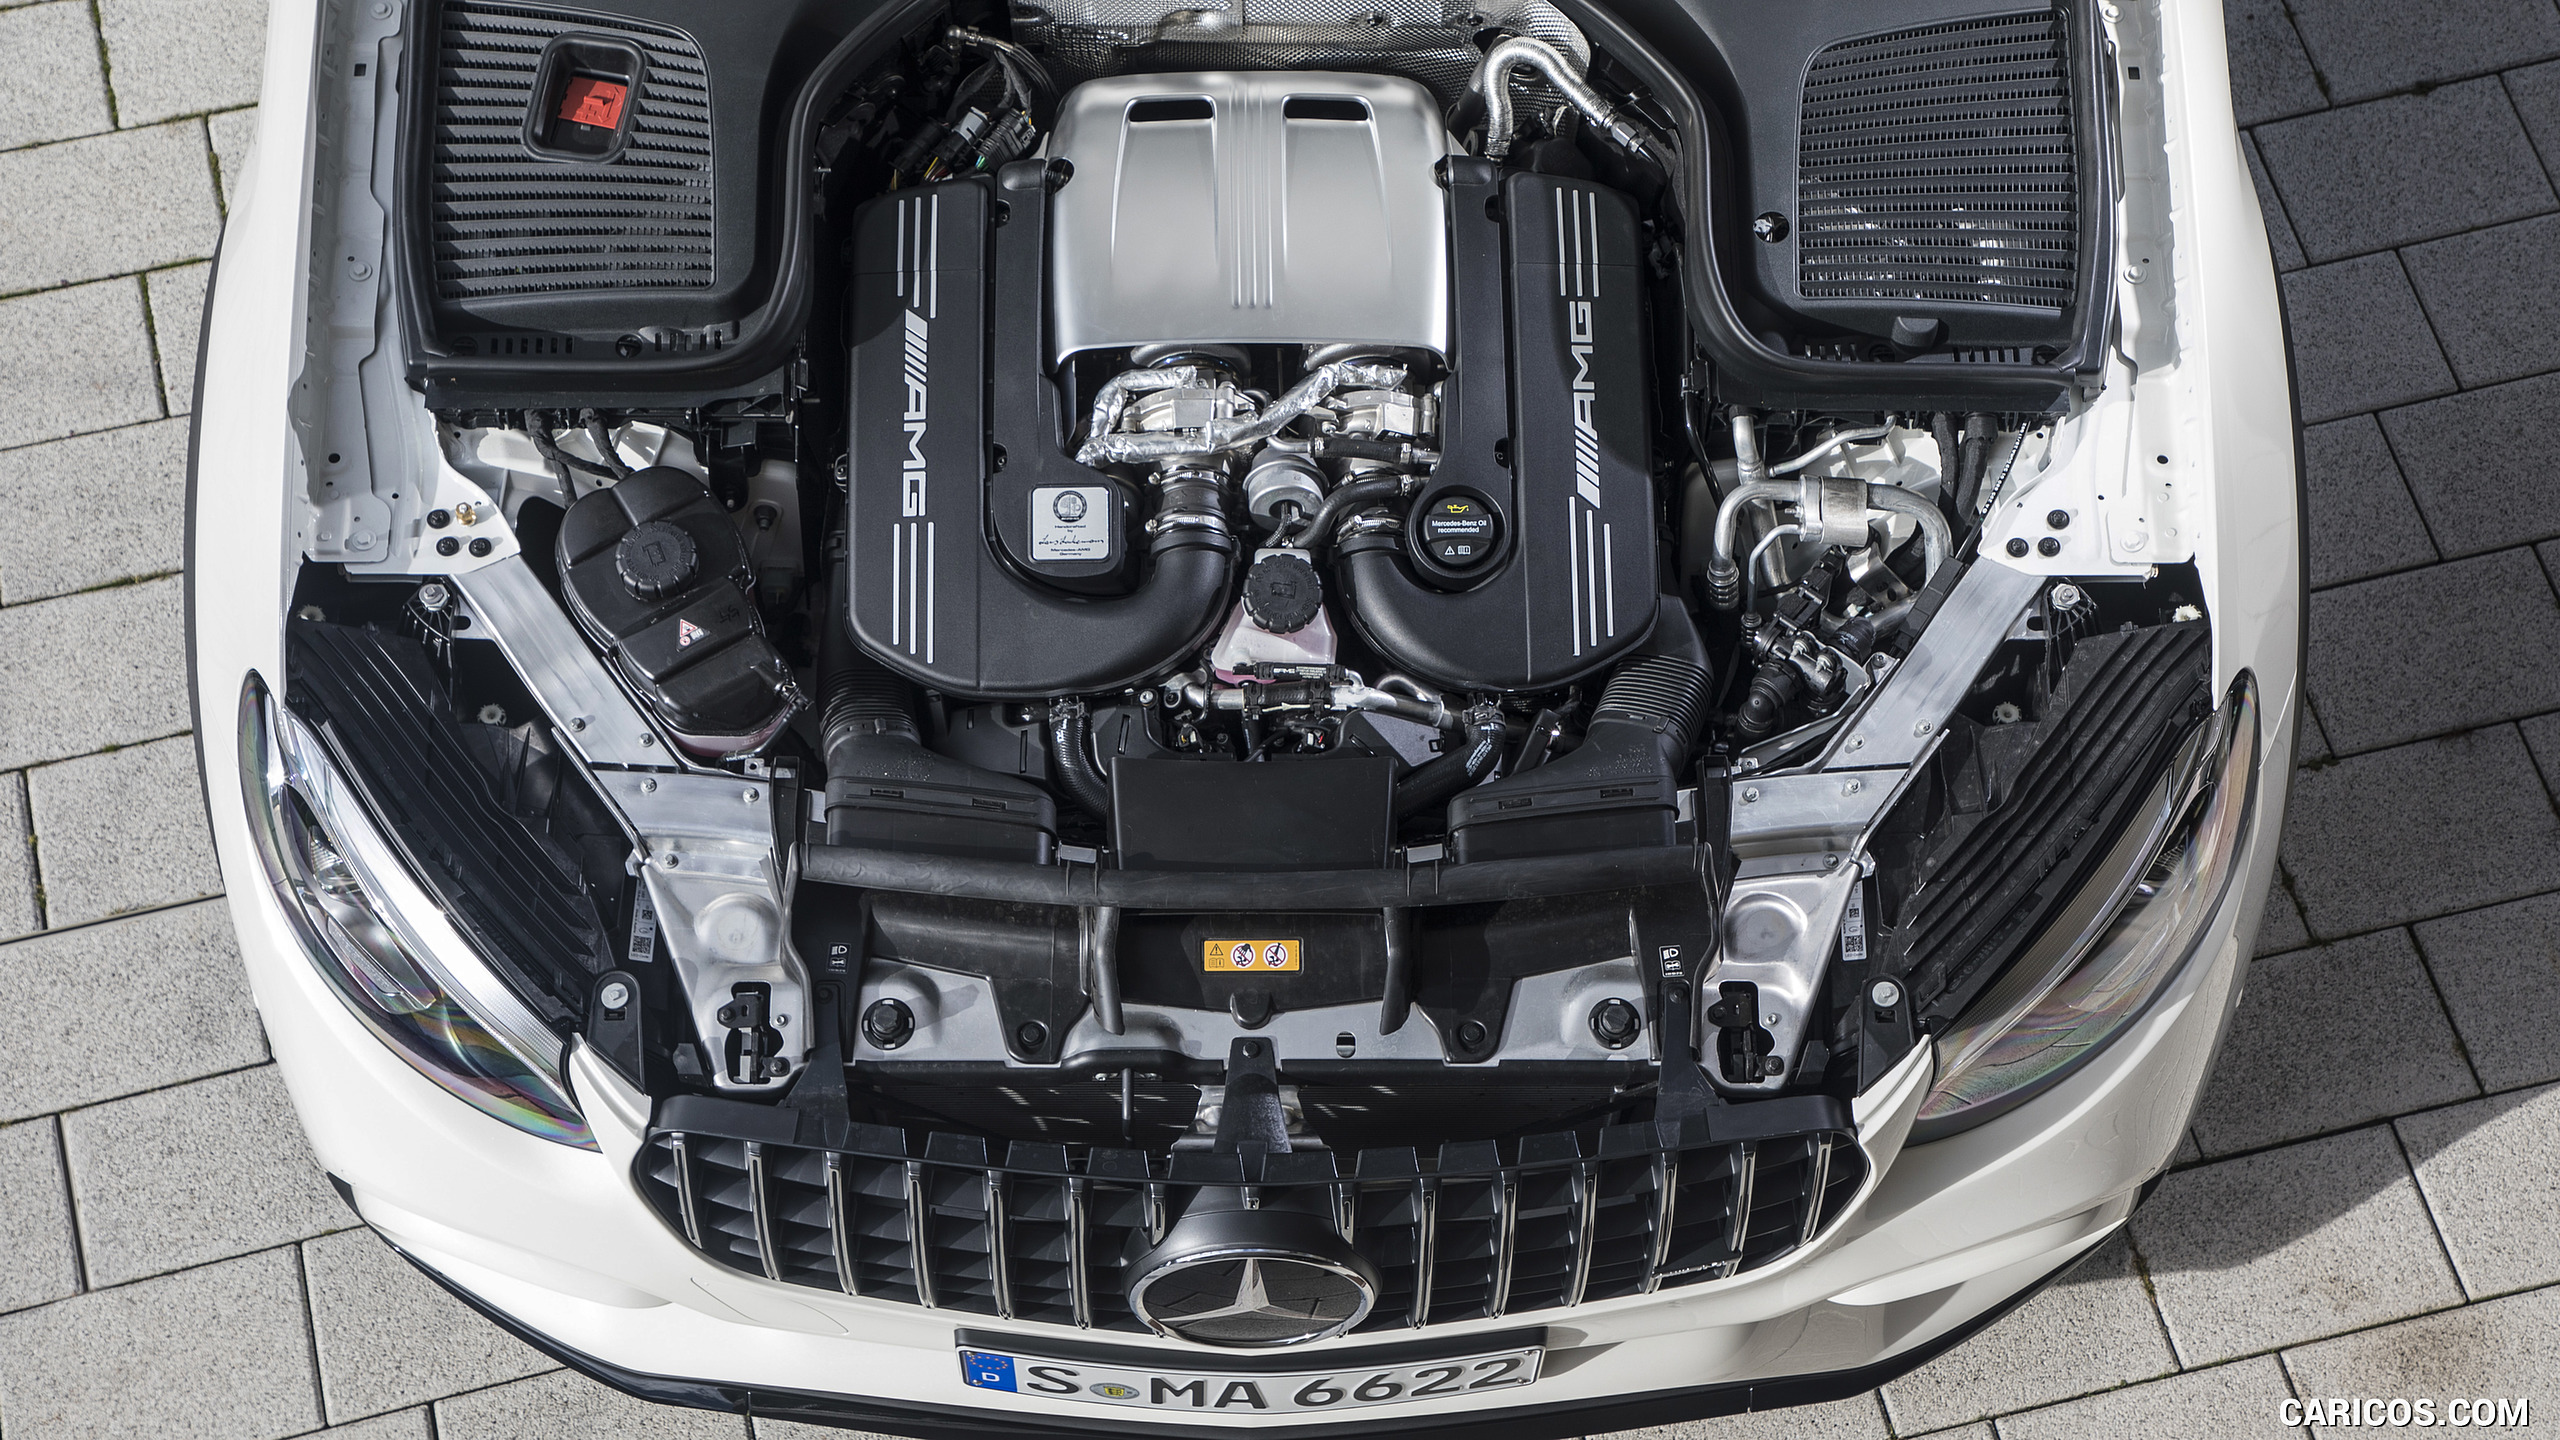 2018 Mercedes-AMG GLC 63 S Coupe - Engine, #56 of 75